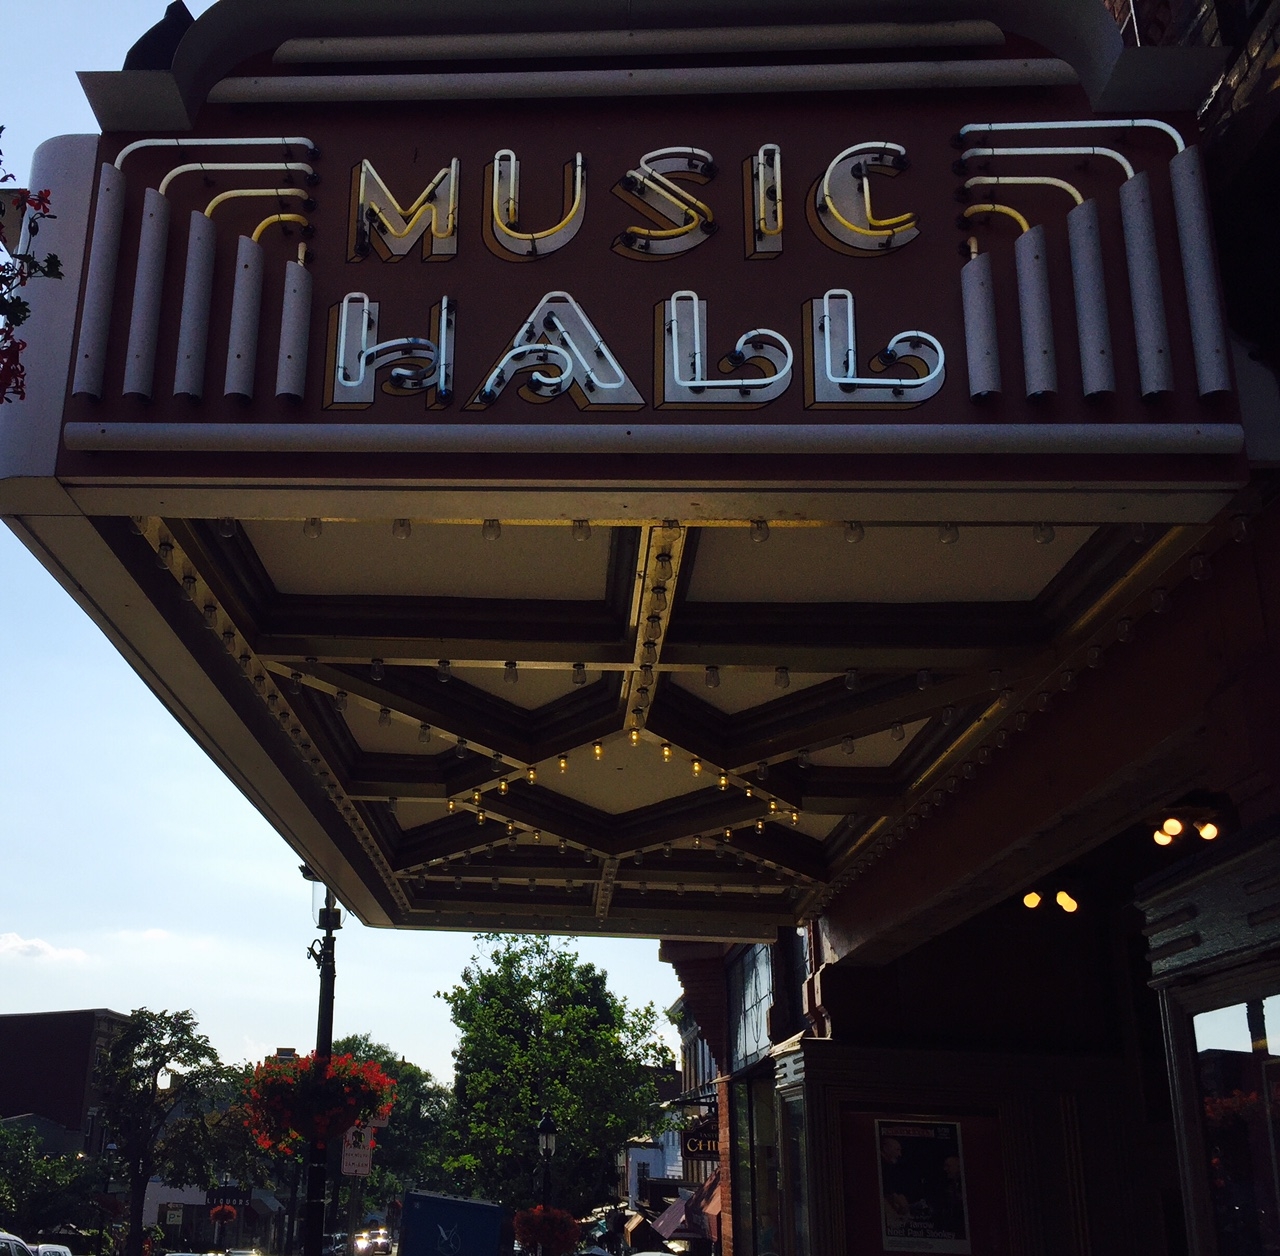 Shows and oldies are featured at the Tarrytown Music Hall. Photo credit: M. Ciavardini